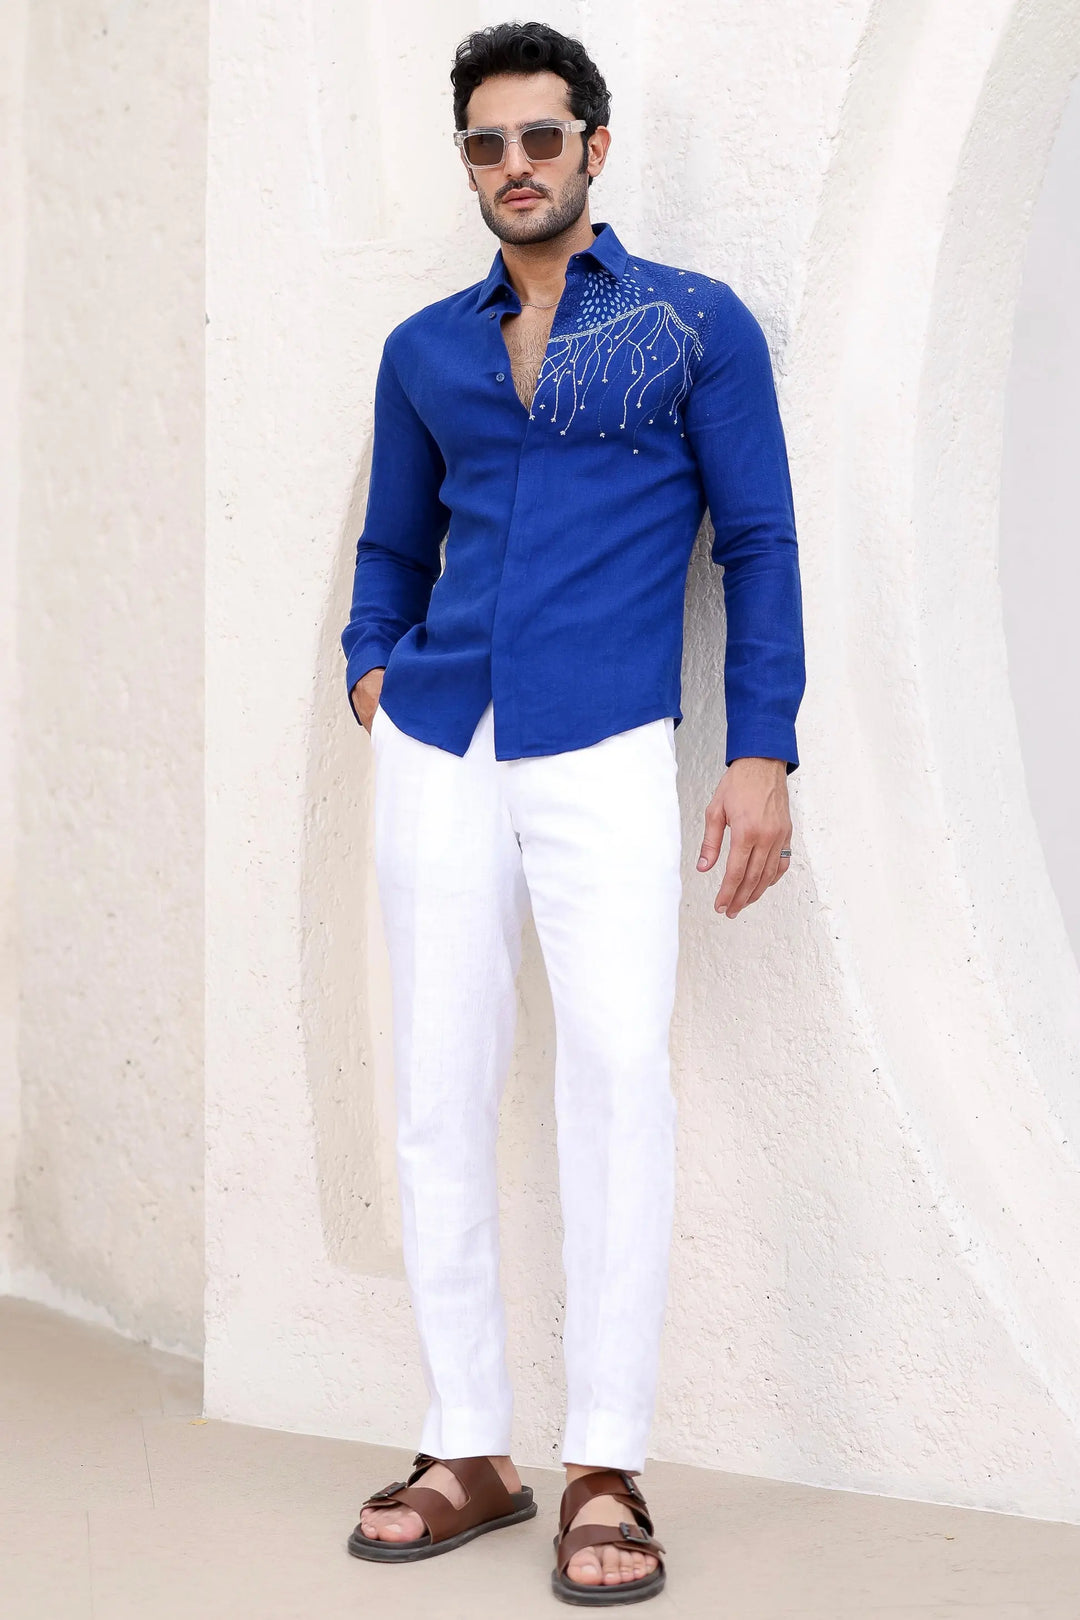 Mens Shirts Embroidery at best price in Mumbai by Khushboo Creations